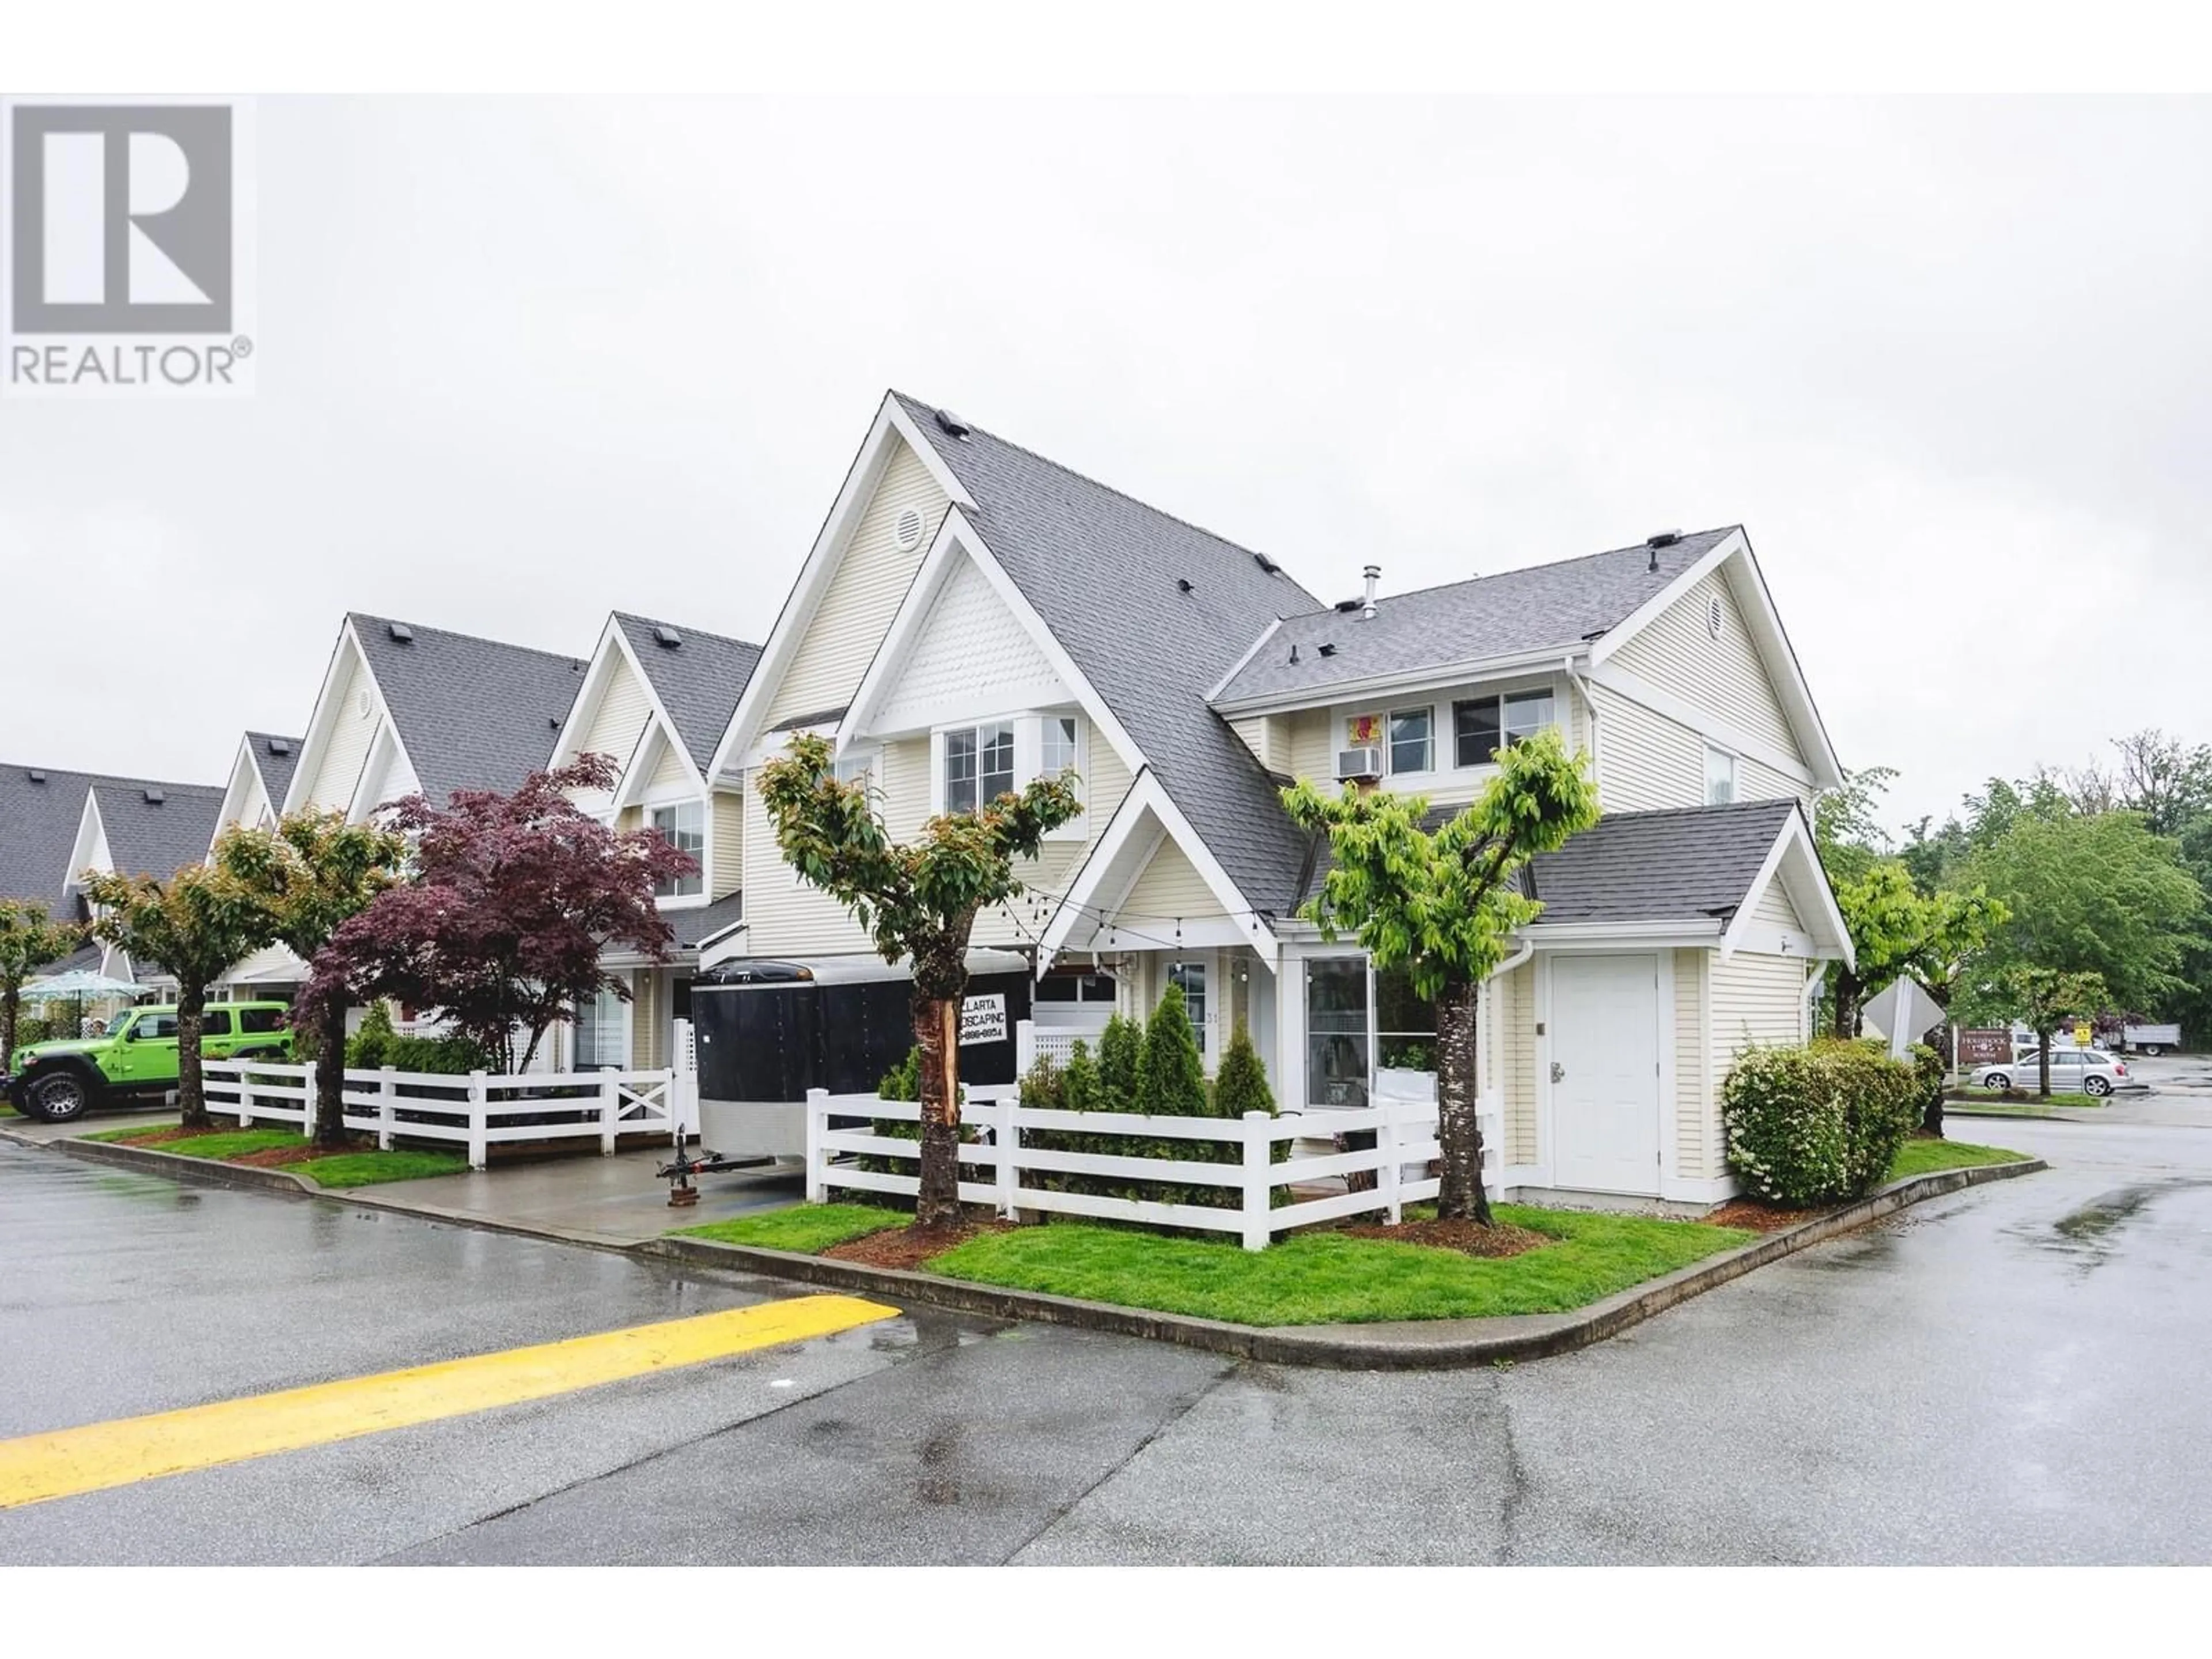 A pic from exterior of the house or condo for 31 23575 119 AVENUE, Maple Ridge British Columbia V4R2P4